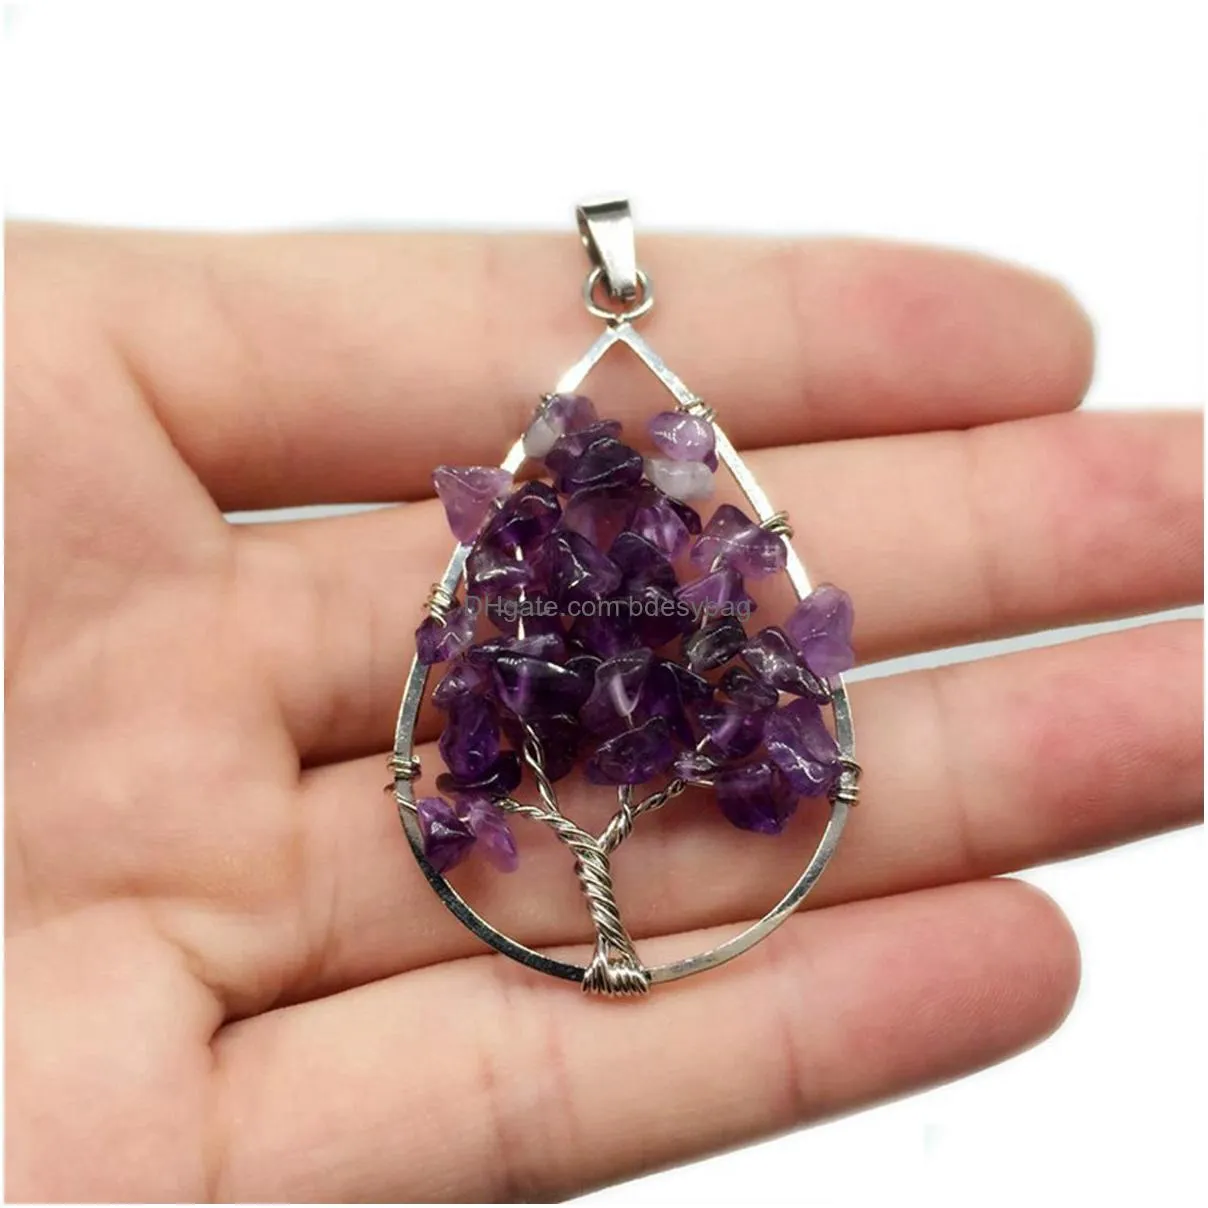 tree of life birthstone sterling silver pendant jewelry natural healing crystals quartz necklace for uni